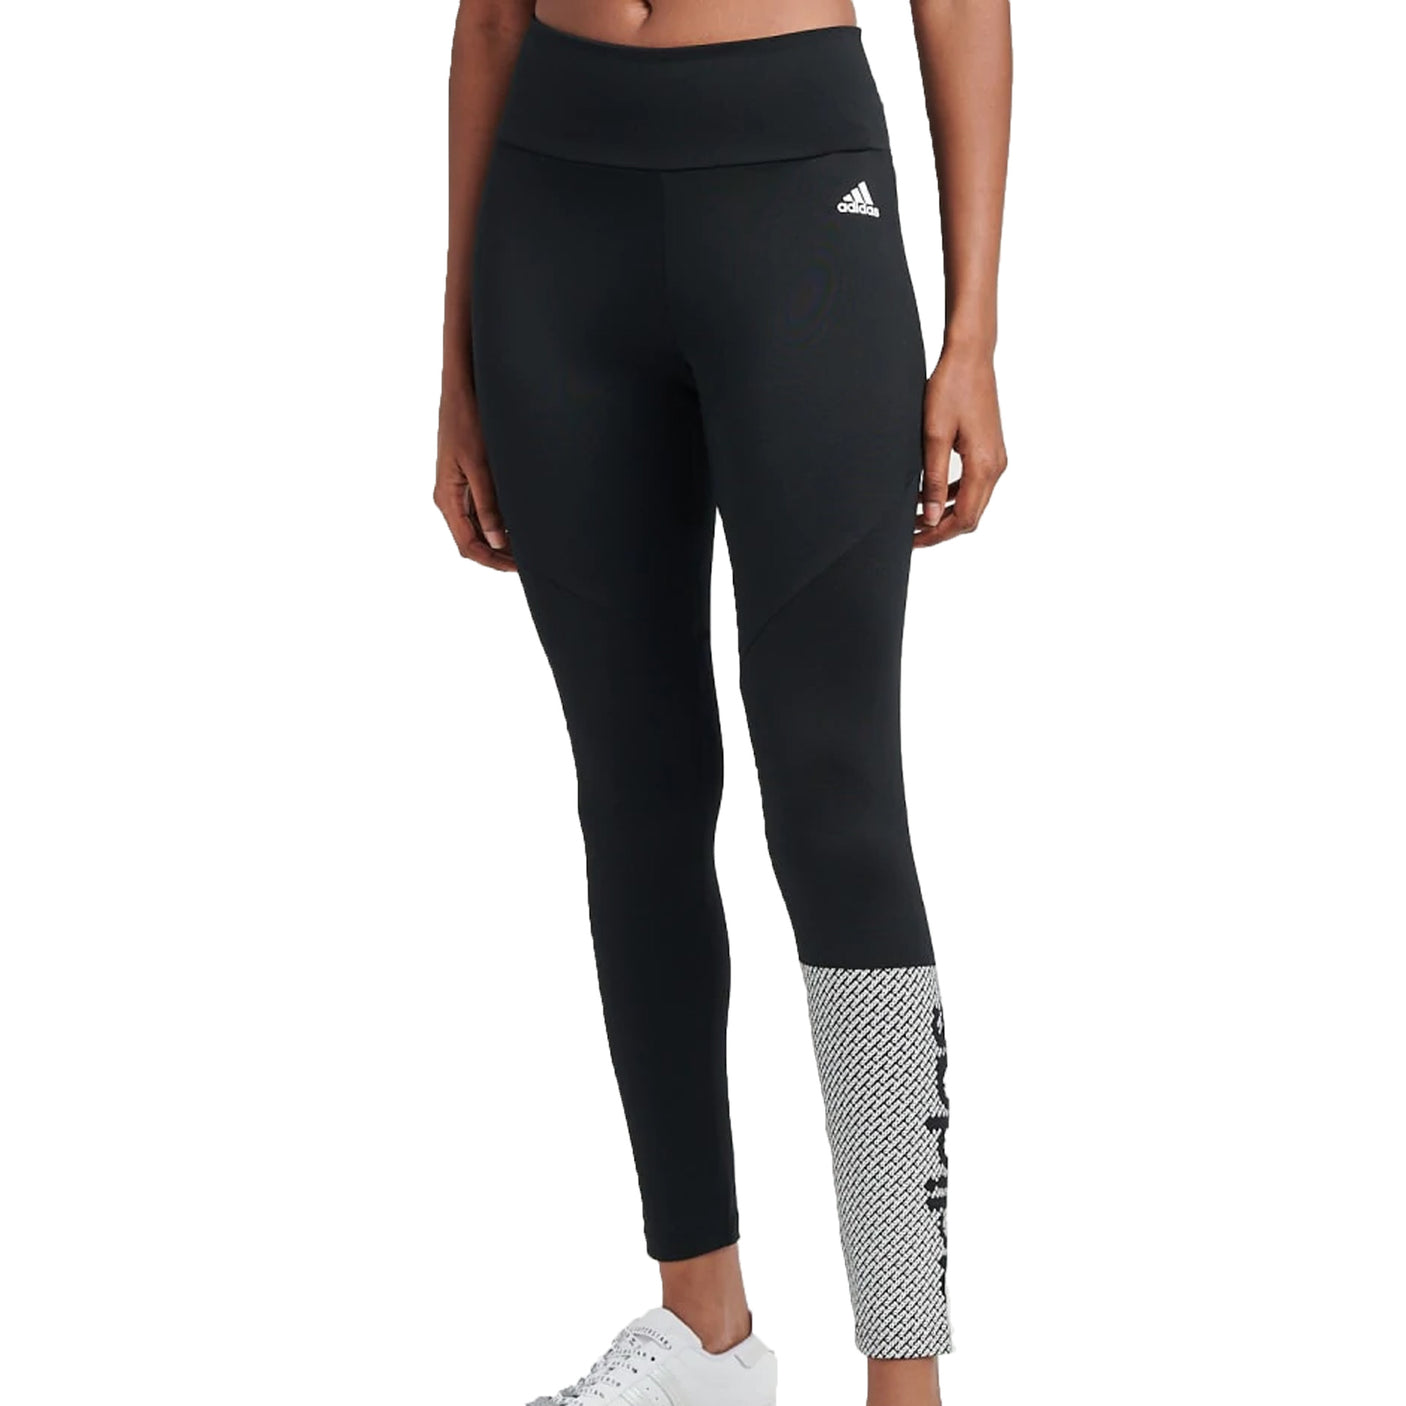 adidas Womens Desire 2 Move Training Tights Black/White Front